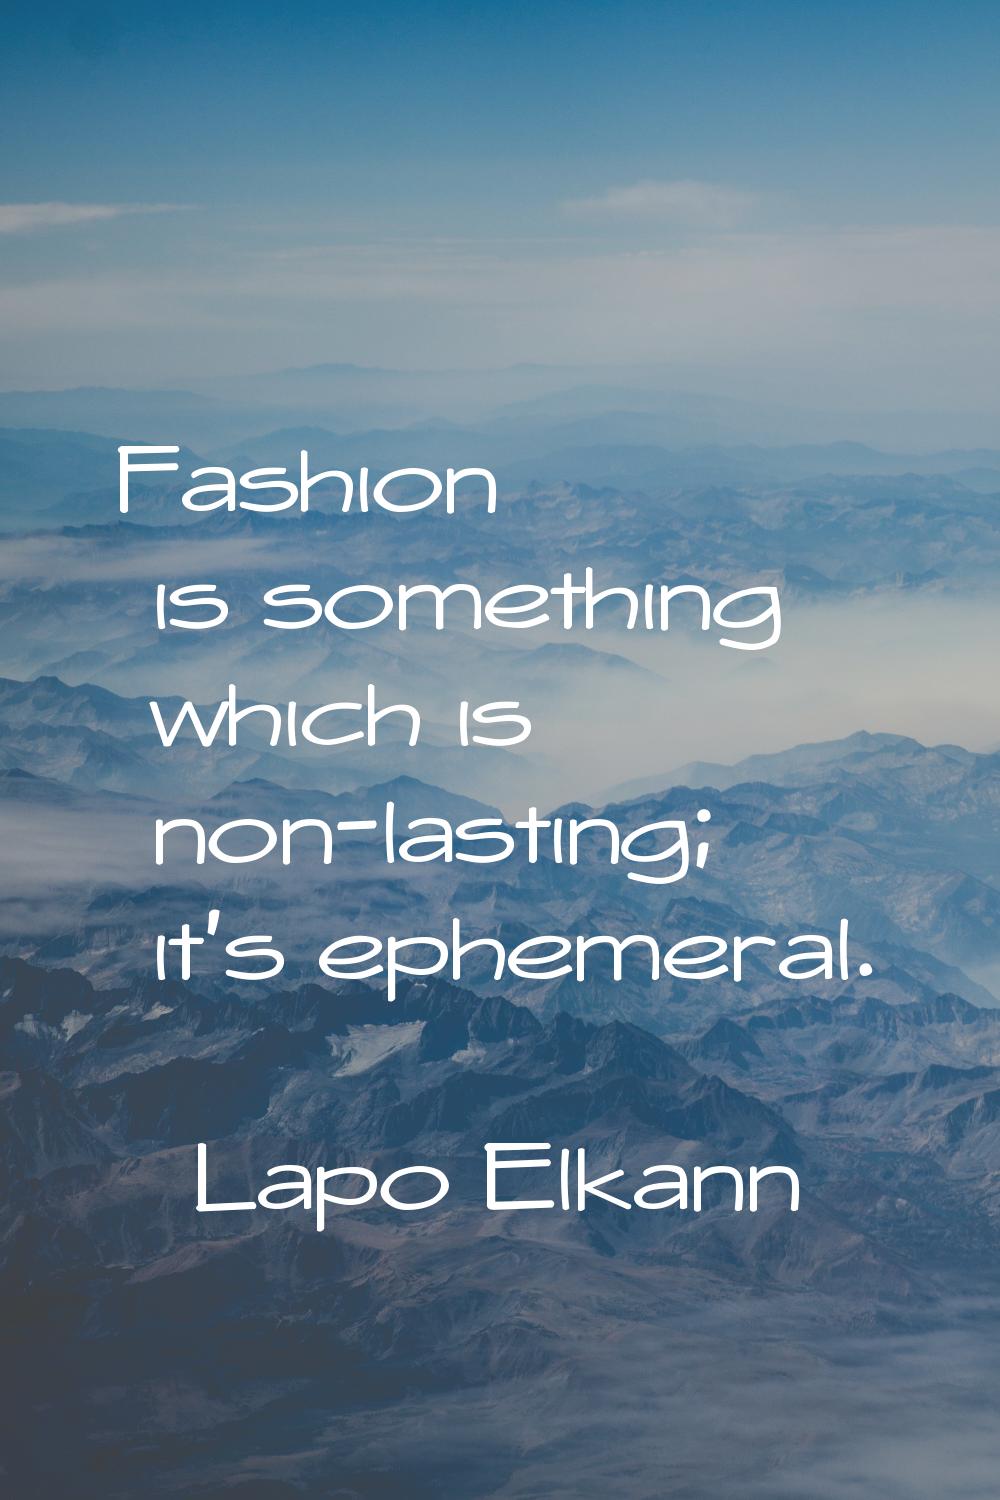 Fashion is something which is non-lasting; it's ephemeral.